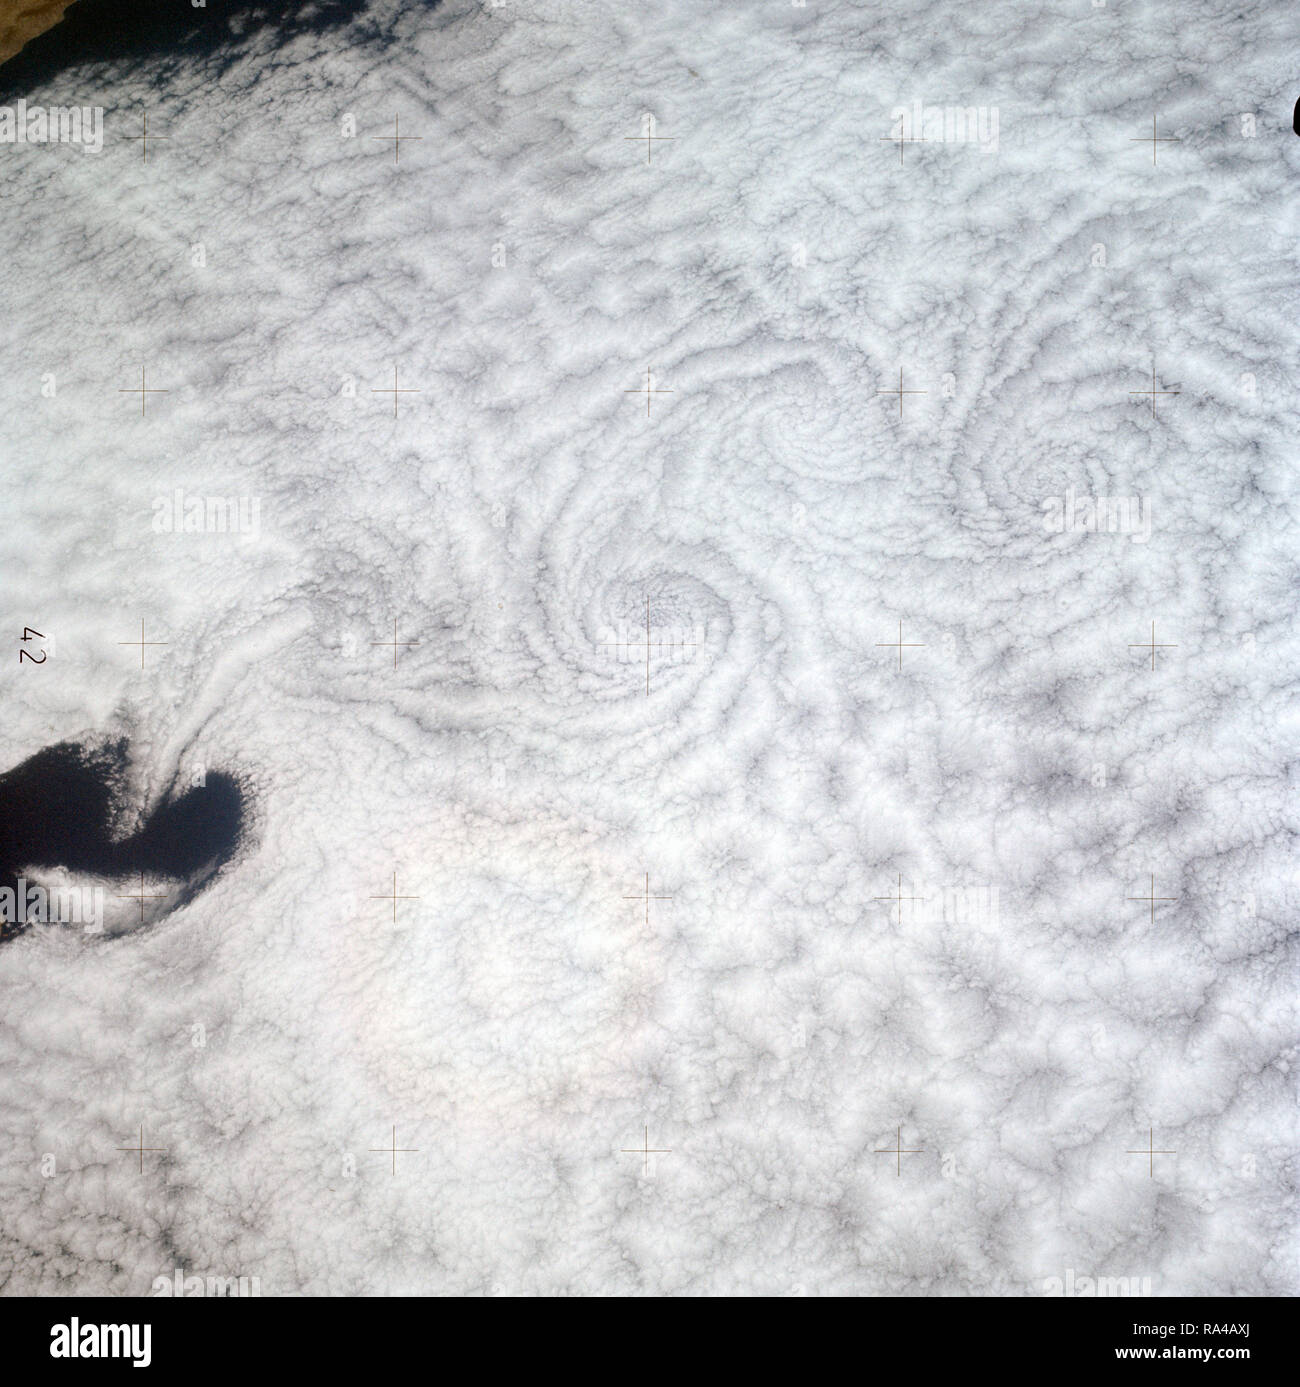 (July-September 1973) --- A pattern of downstream eddies in the stratocumulus clouds over the Pacific Ocean west of Baja California, as photographed by the crewmen of the second Skylab manned mission (Skylab 3) from the space station cluster in Earth orbit. The clouds, produced by the cold California current running to the south and southwest, are prevented from rising by warm air above them. Stock Photo